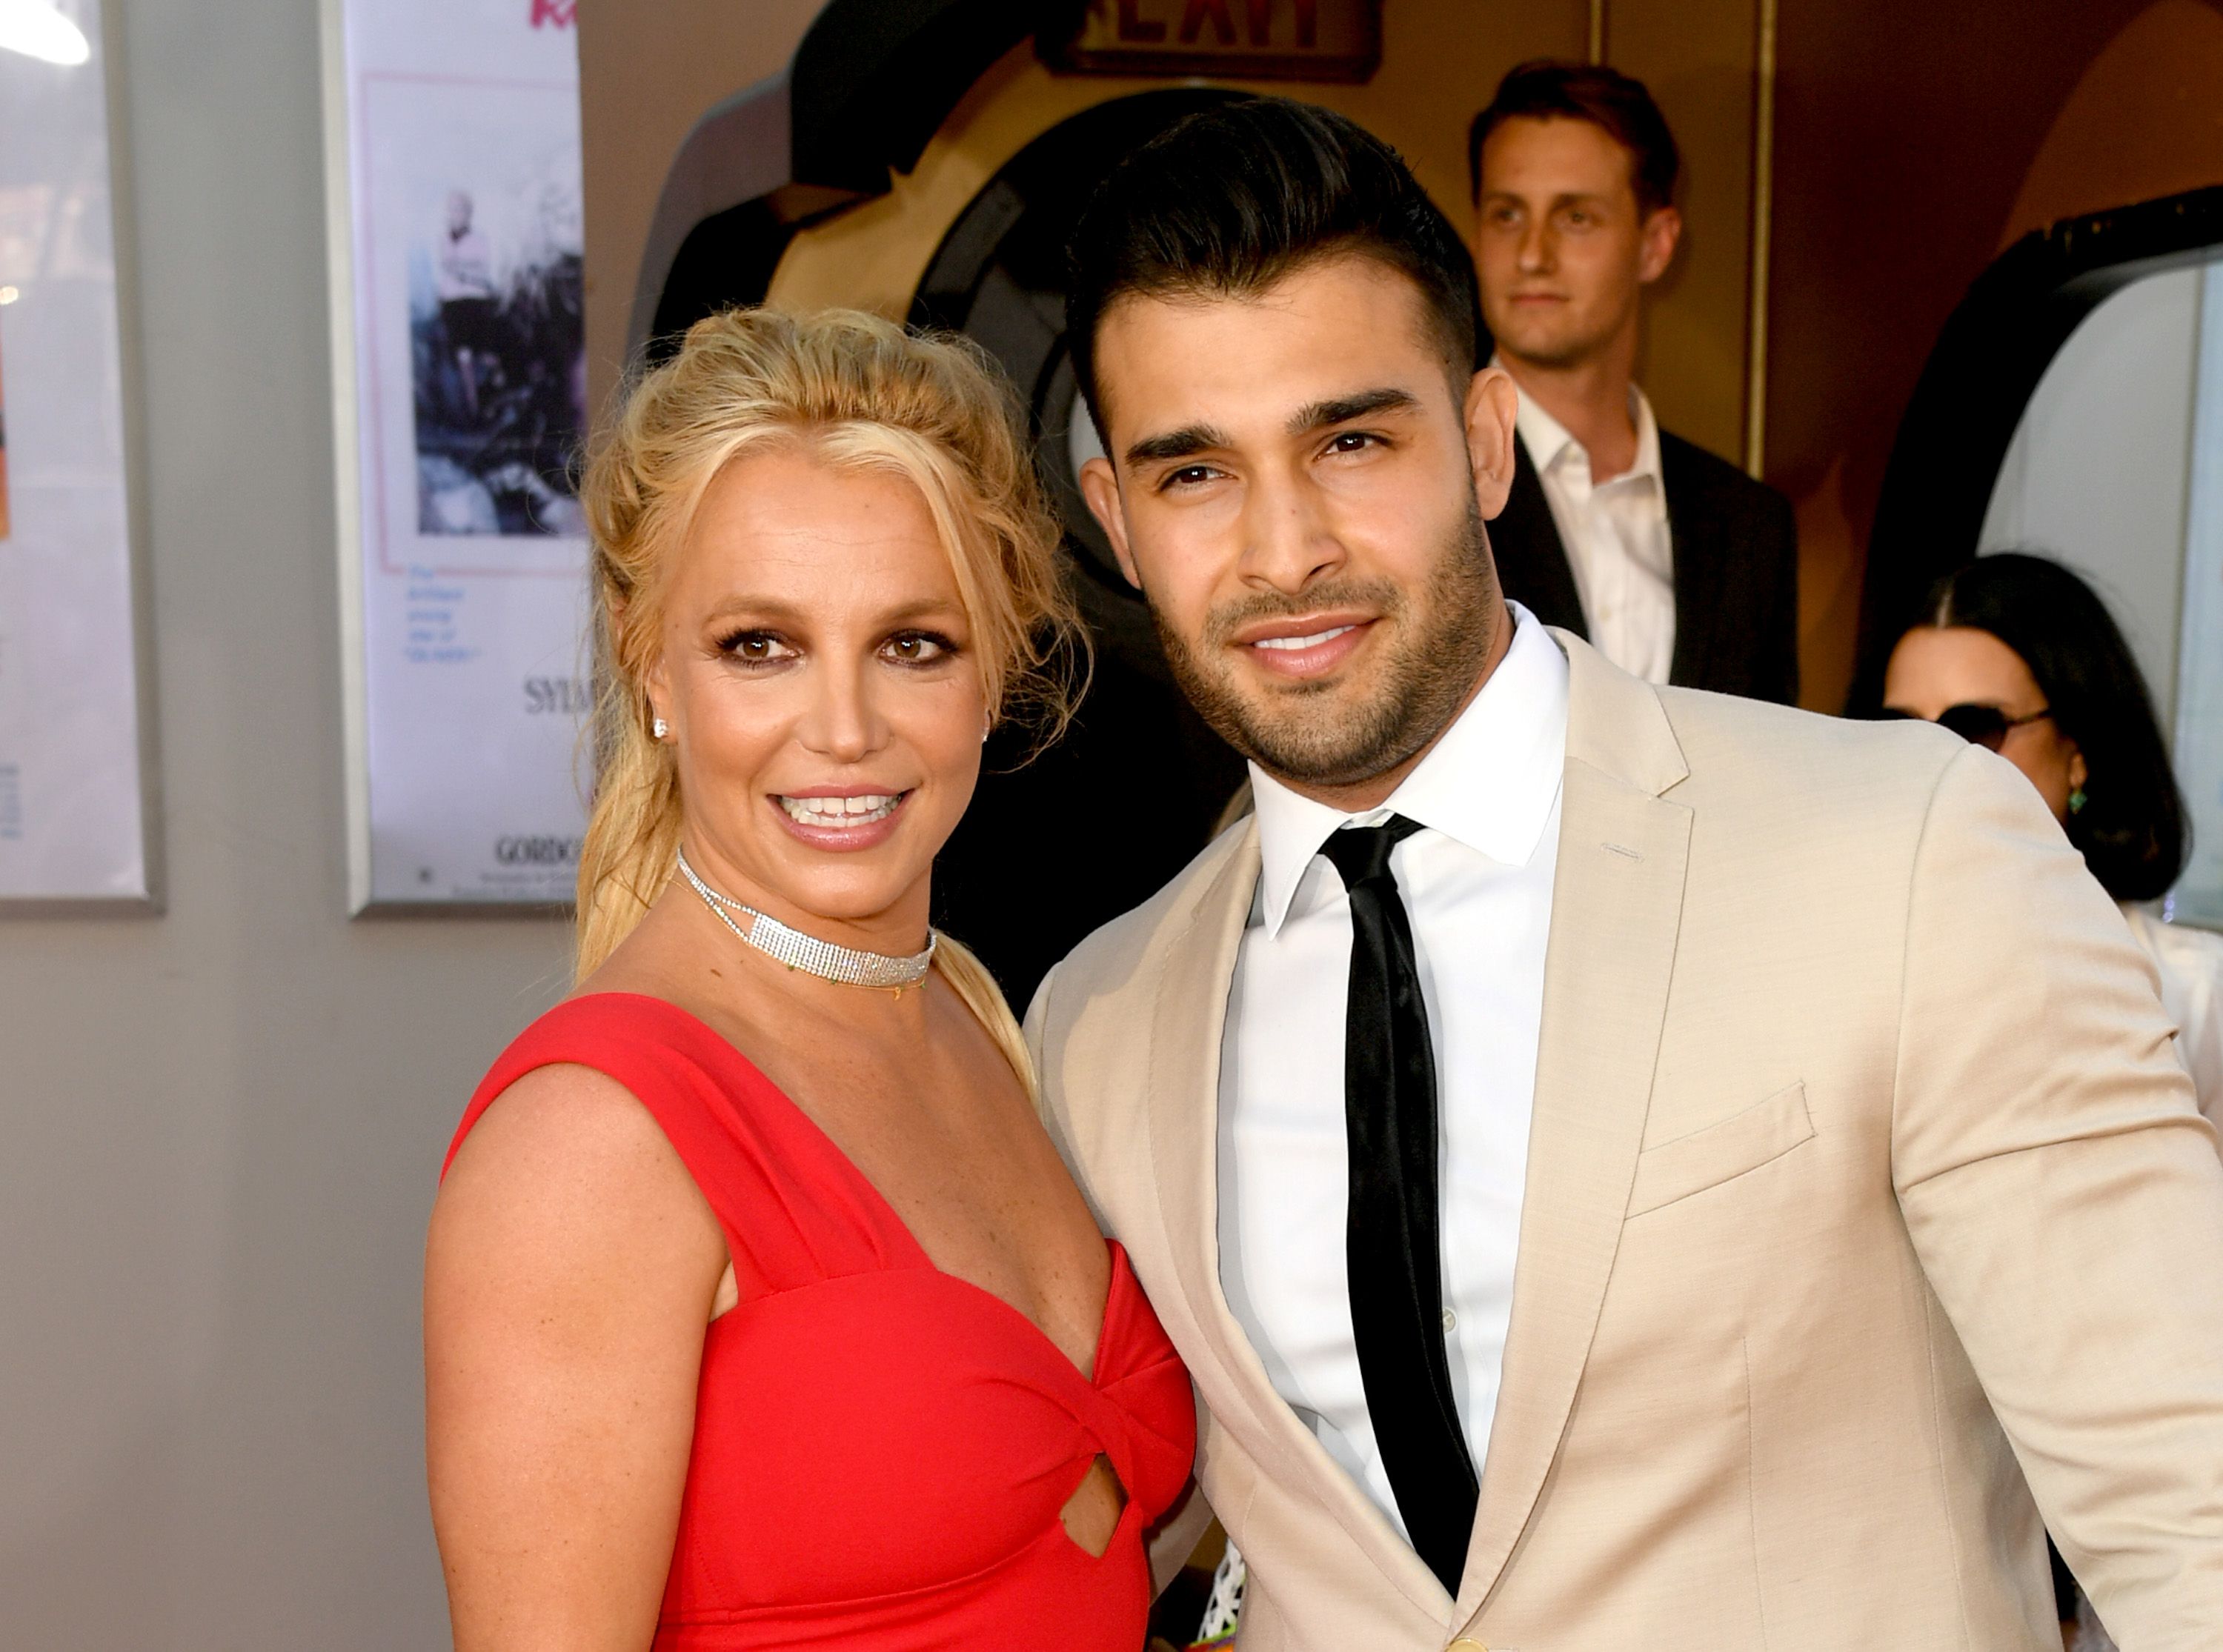 Britney Spears and Sam Asghari during the premiere of Sony Pictures' "One Upon A Time...In Hollywood" at the Chinese Theatre on July 22, 2019 in Hollywood, California. | Source: Getty Images